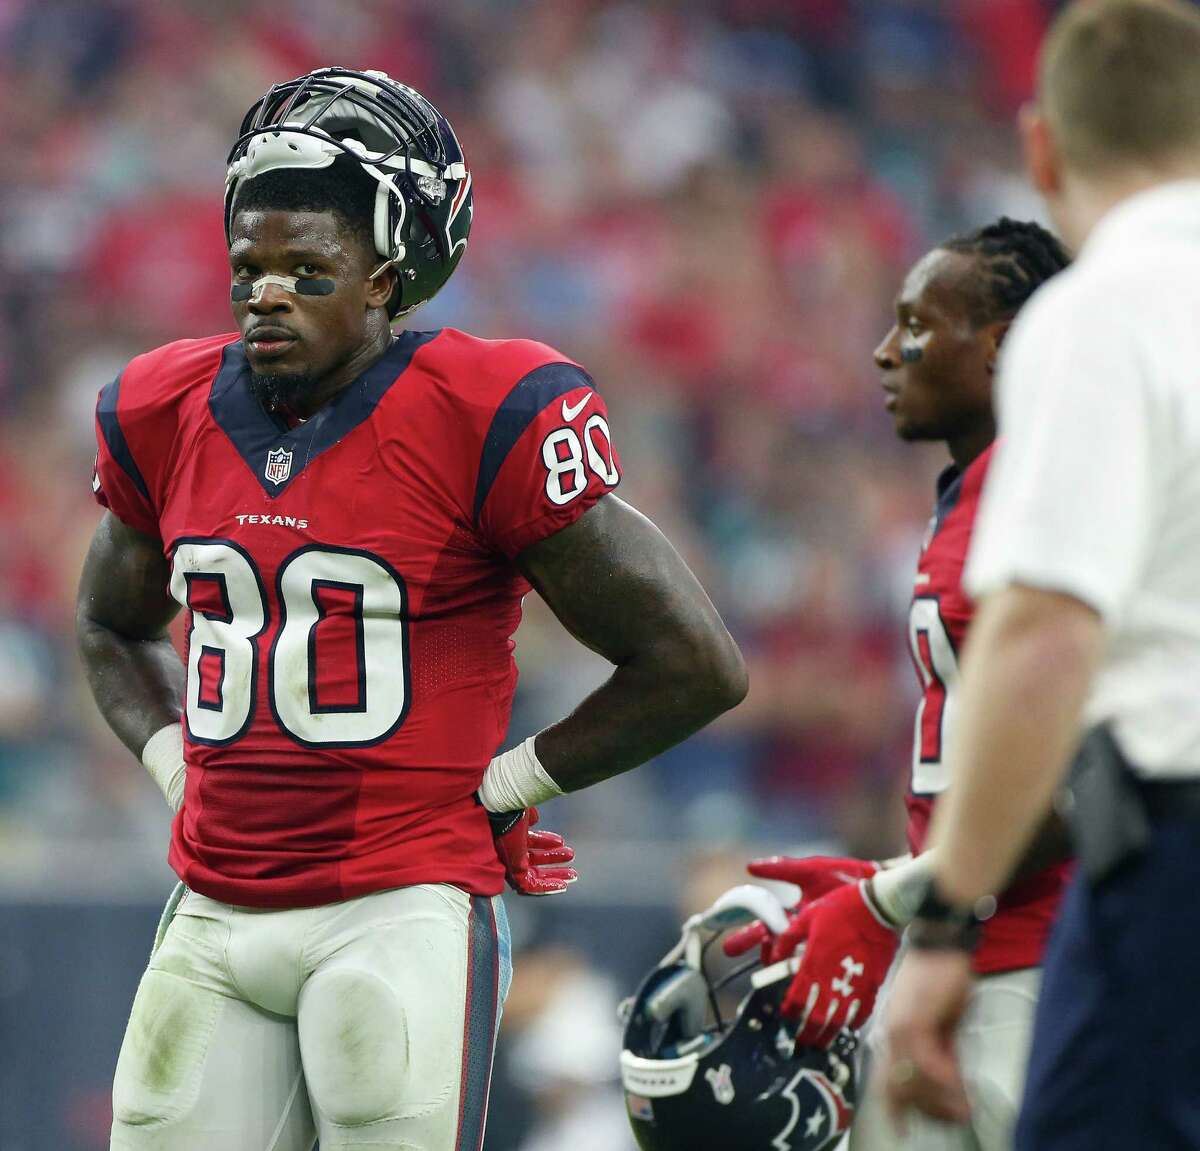 Andre Johnson leaves the field in December after playing in the 169th and, as it turned out, final game of a Texans career that saw him make seven Pro Bowls.